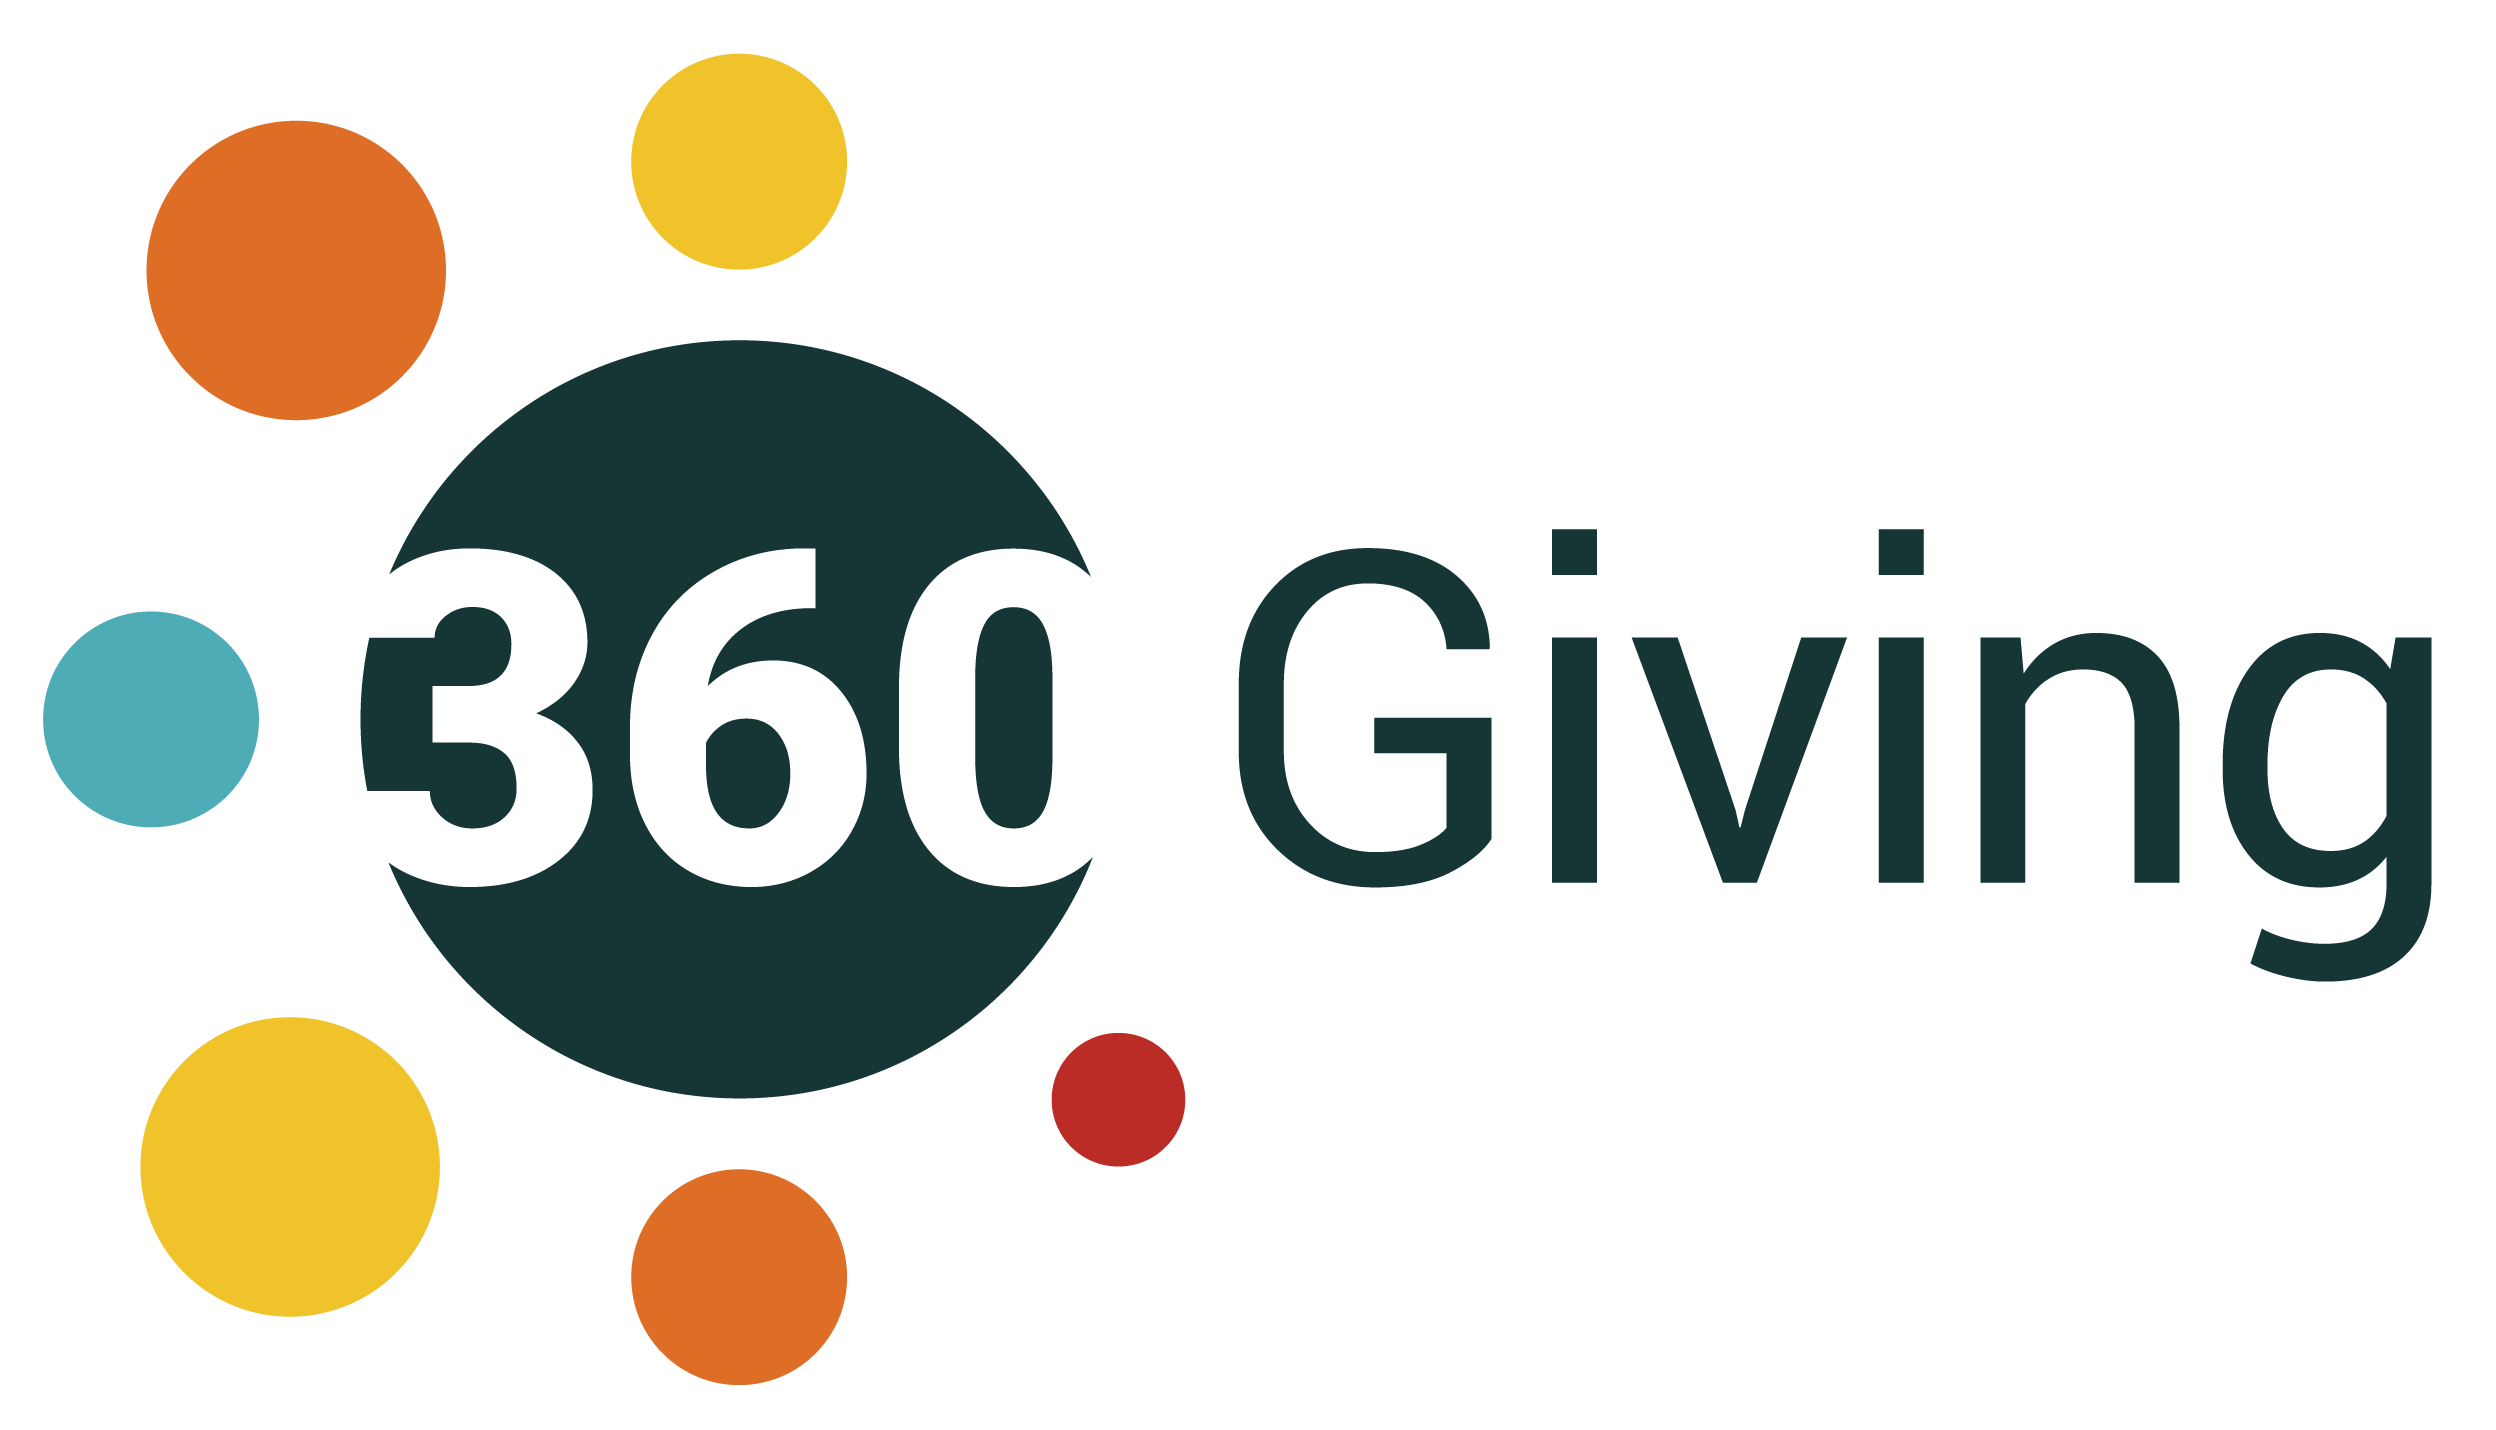 3 60 Giving logo including the name of the organisation and warm-toned coloured circles of different sizes